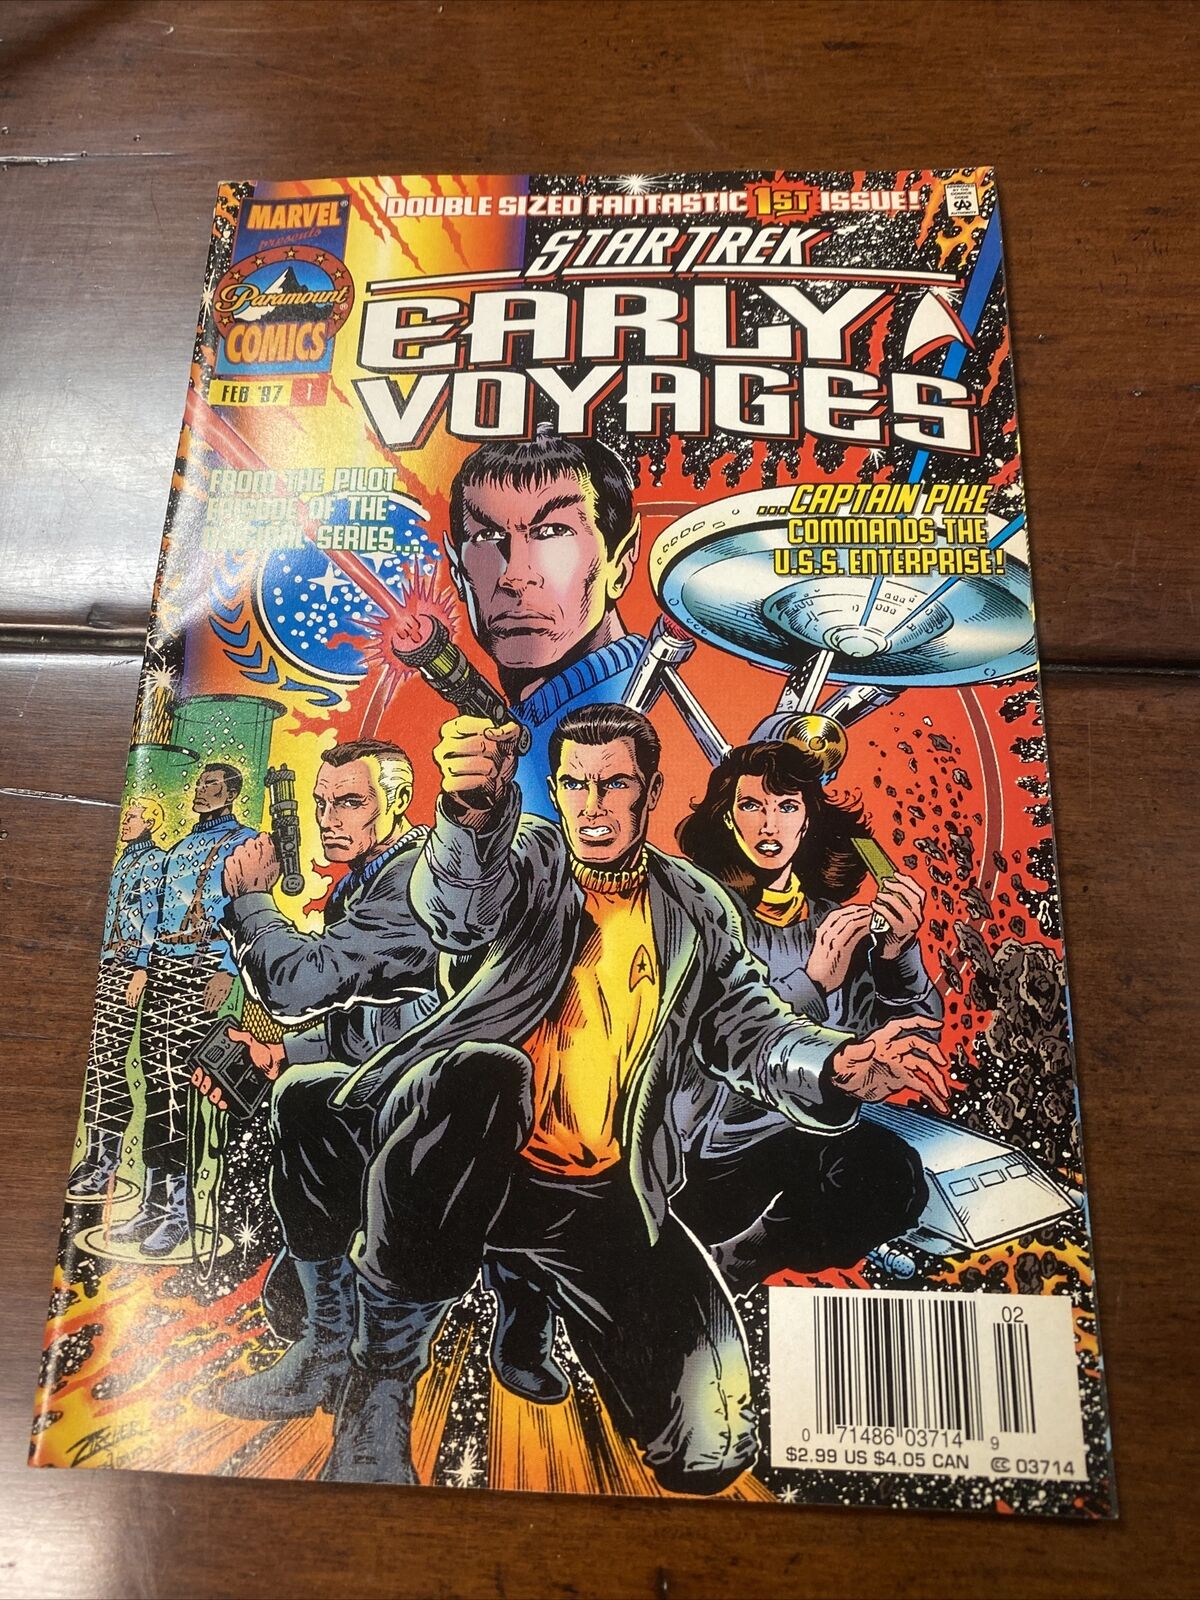 Star Trek Early Voyages Issue 1 Feb 1997 Comic Book Marvel Comics 